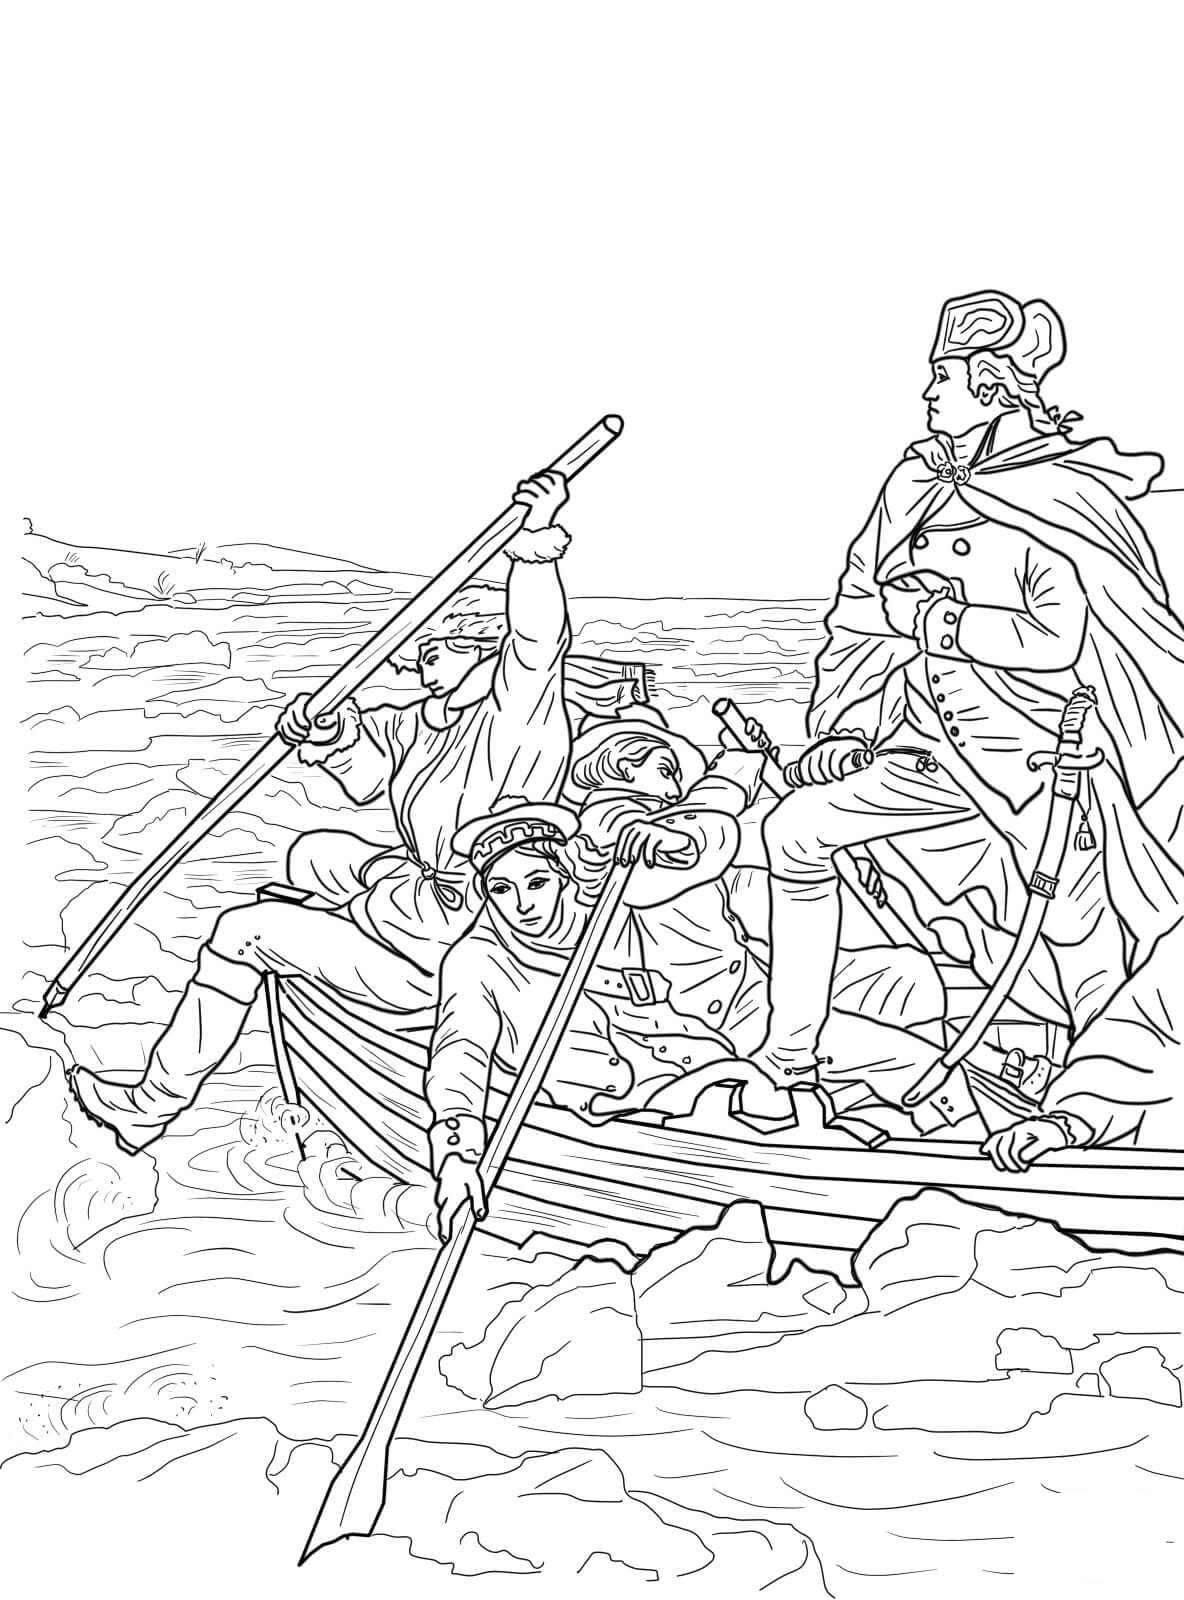 Printable American Revolution Coloring Pages Pdf - American Revolution Coloring Pages Free